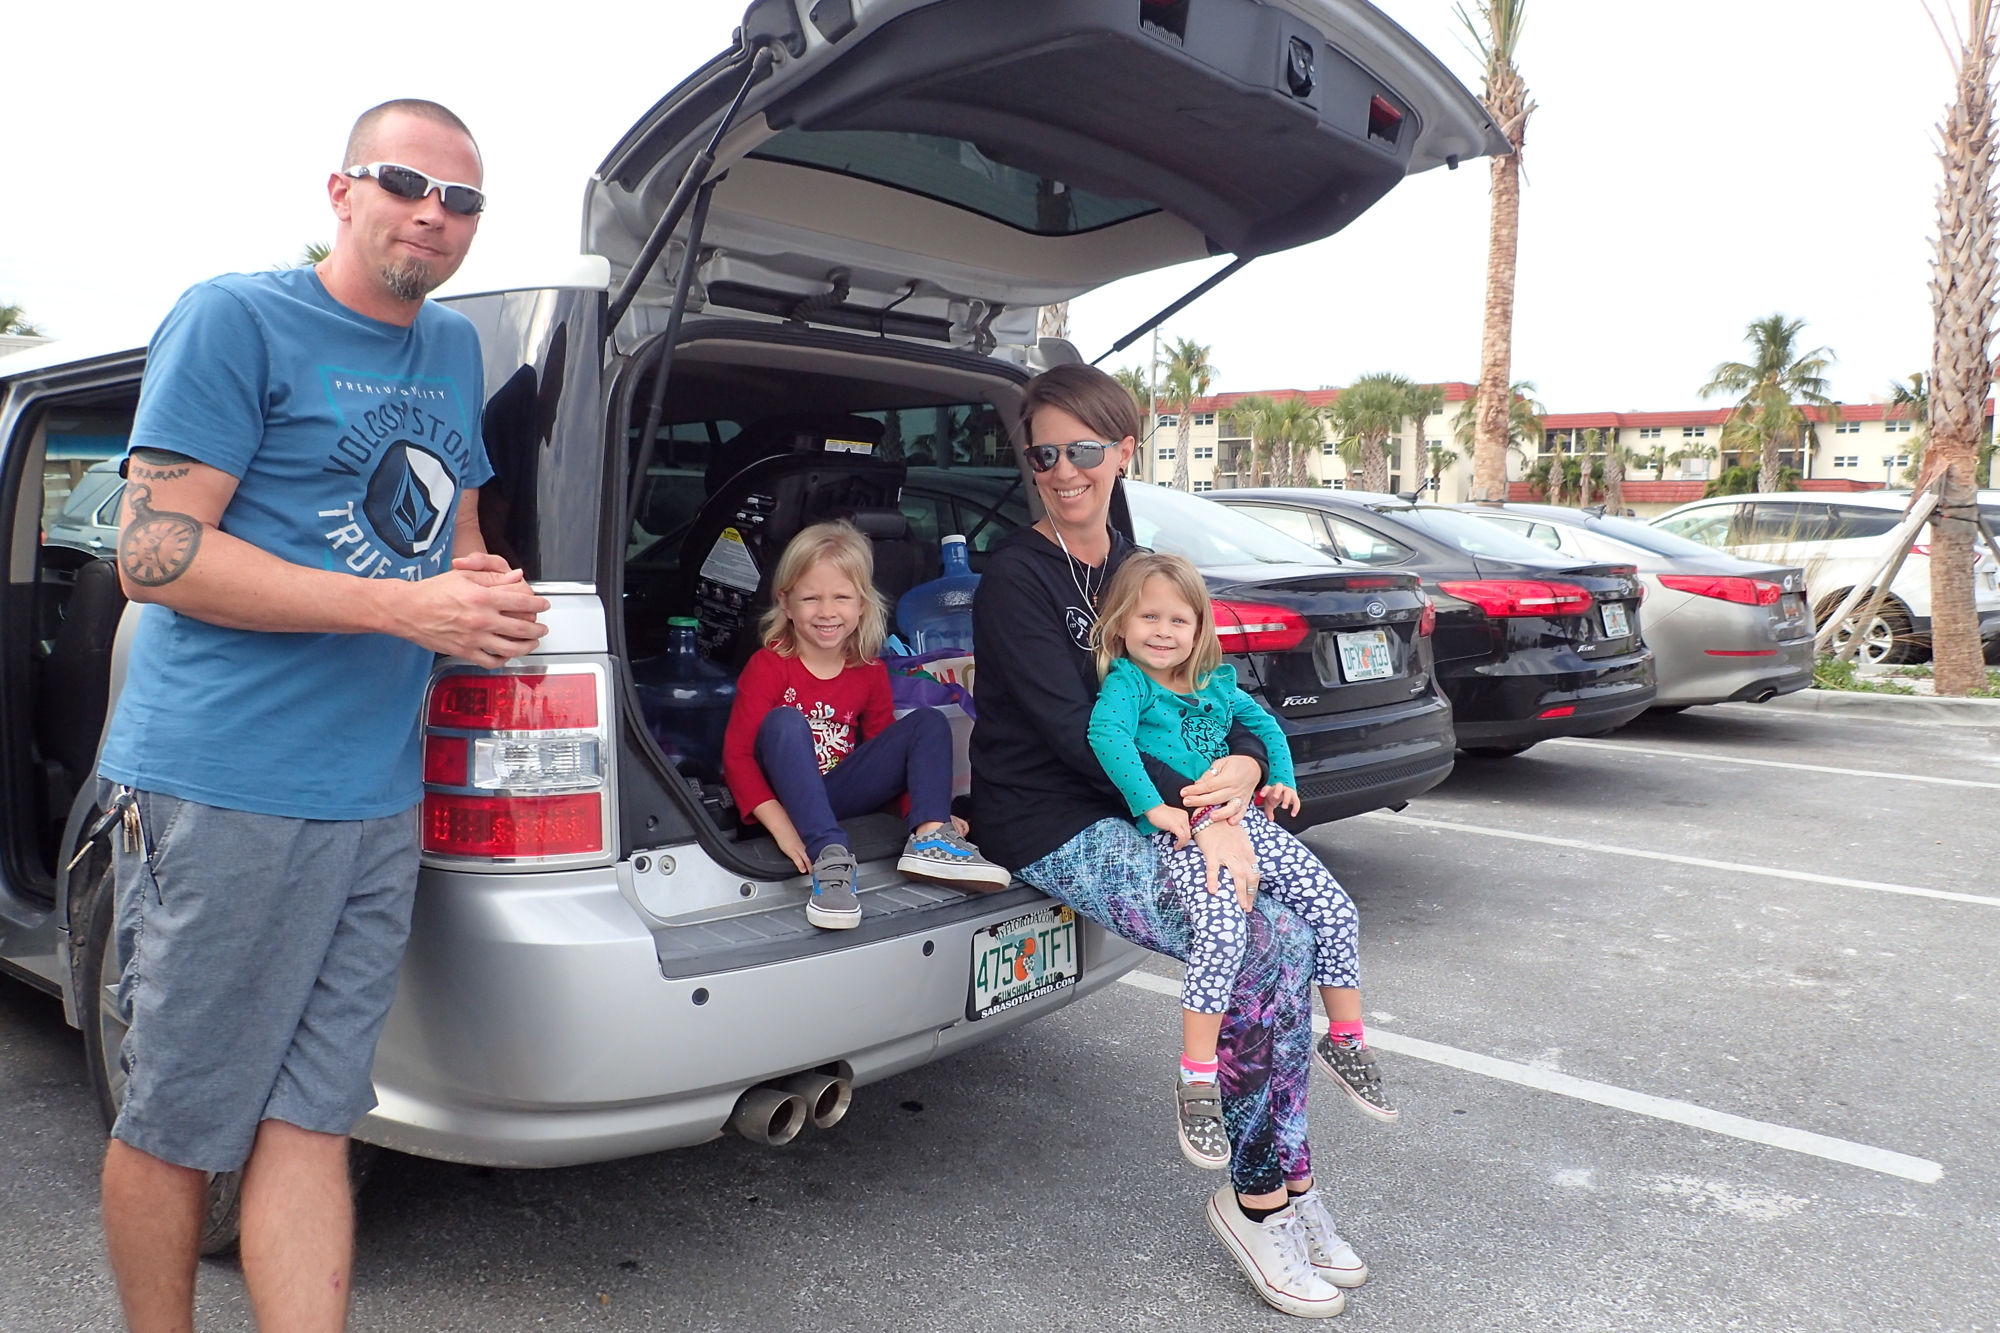 The Seaman family says the process of connecting from east Sarasota, as well as carrying beach things by bus, is too daunting.